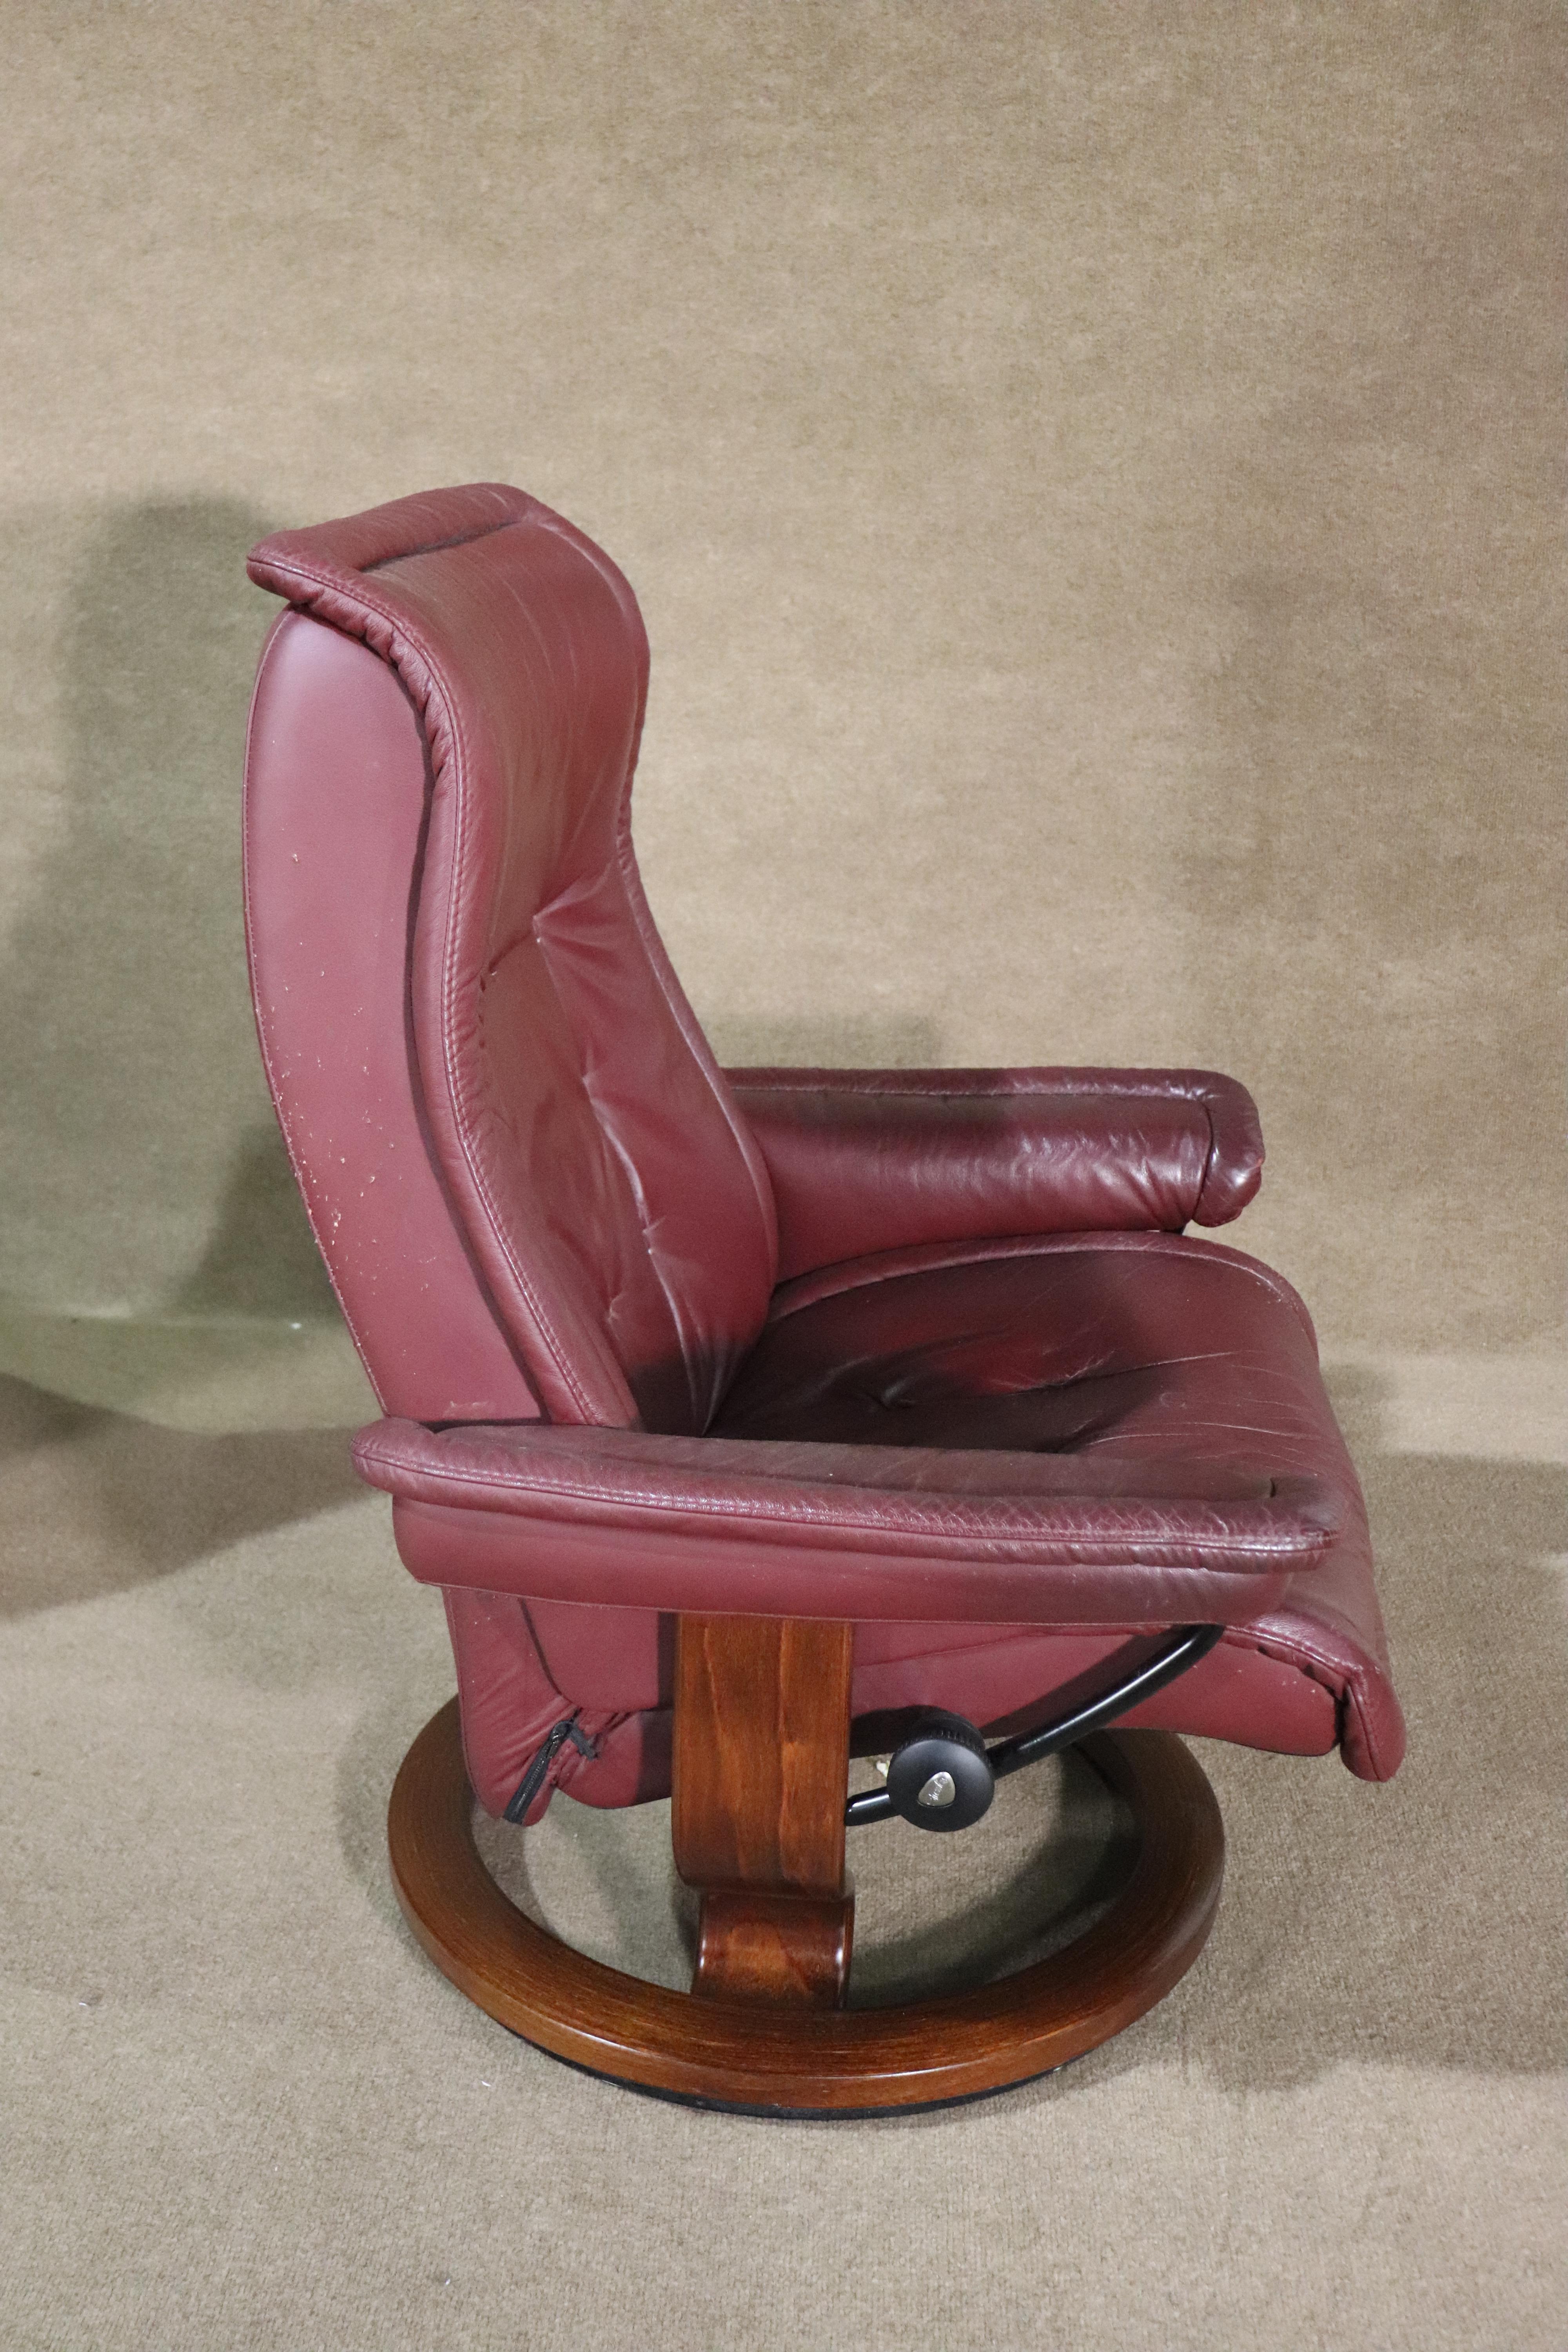 Vintage leather lounger with ottoman by Ekornes. Features soft maroon colored leather on a polished bentwood base.
Listing is for one.
Please confirm location NY or NJ